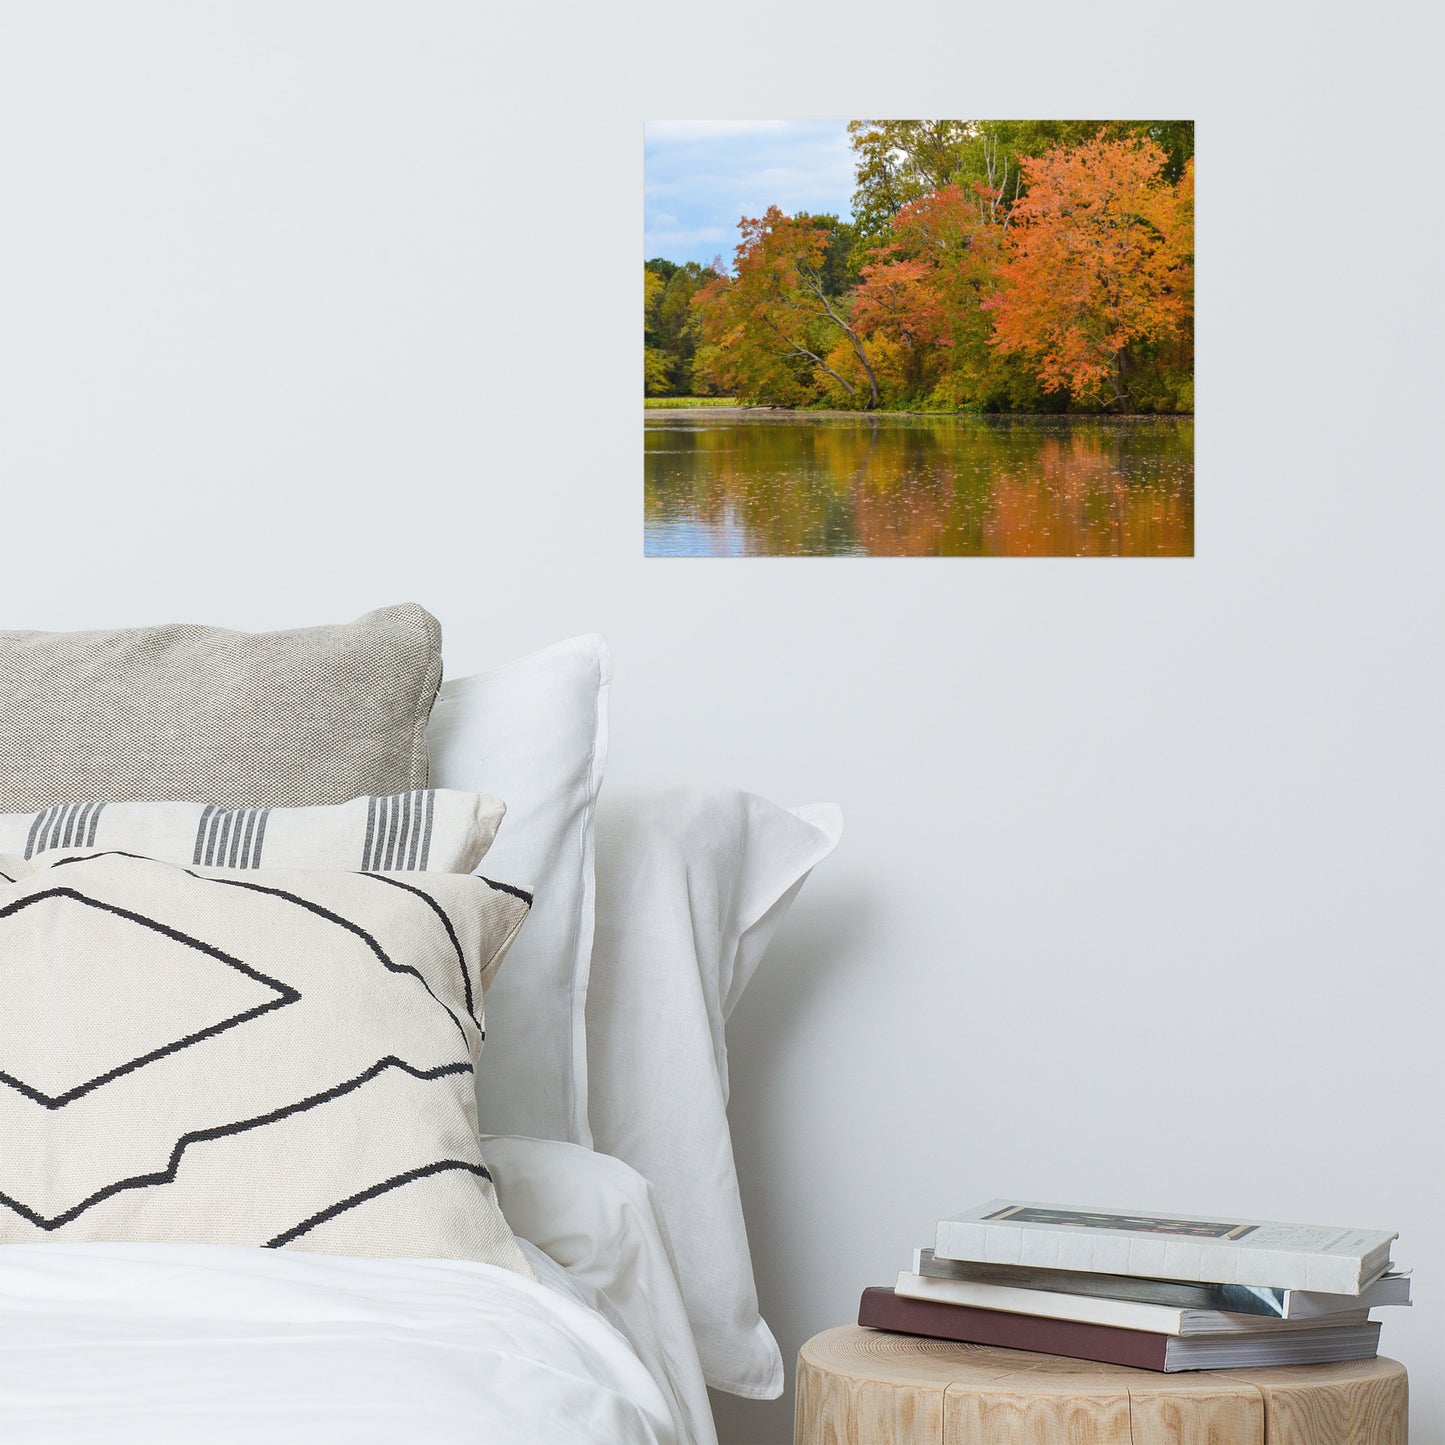 Art Above Bedside Tables: Colorful Trees in Fall Color Edge of Pond - Rural / Country Style Landscape / Nature Loose / Unframed / Frameless / Frameable Photograph Wall Art Print - Artwork